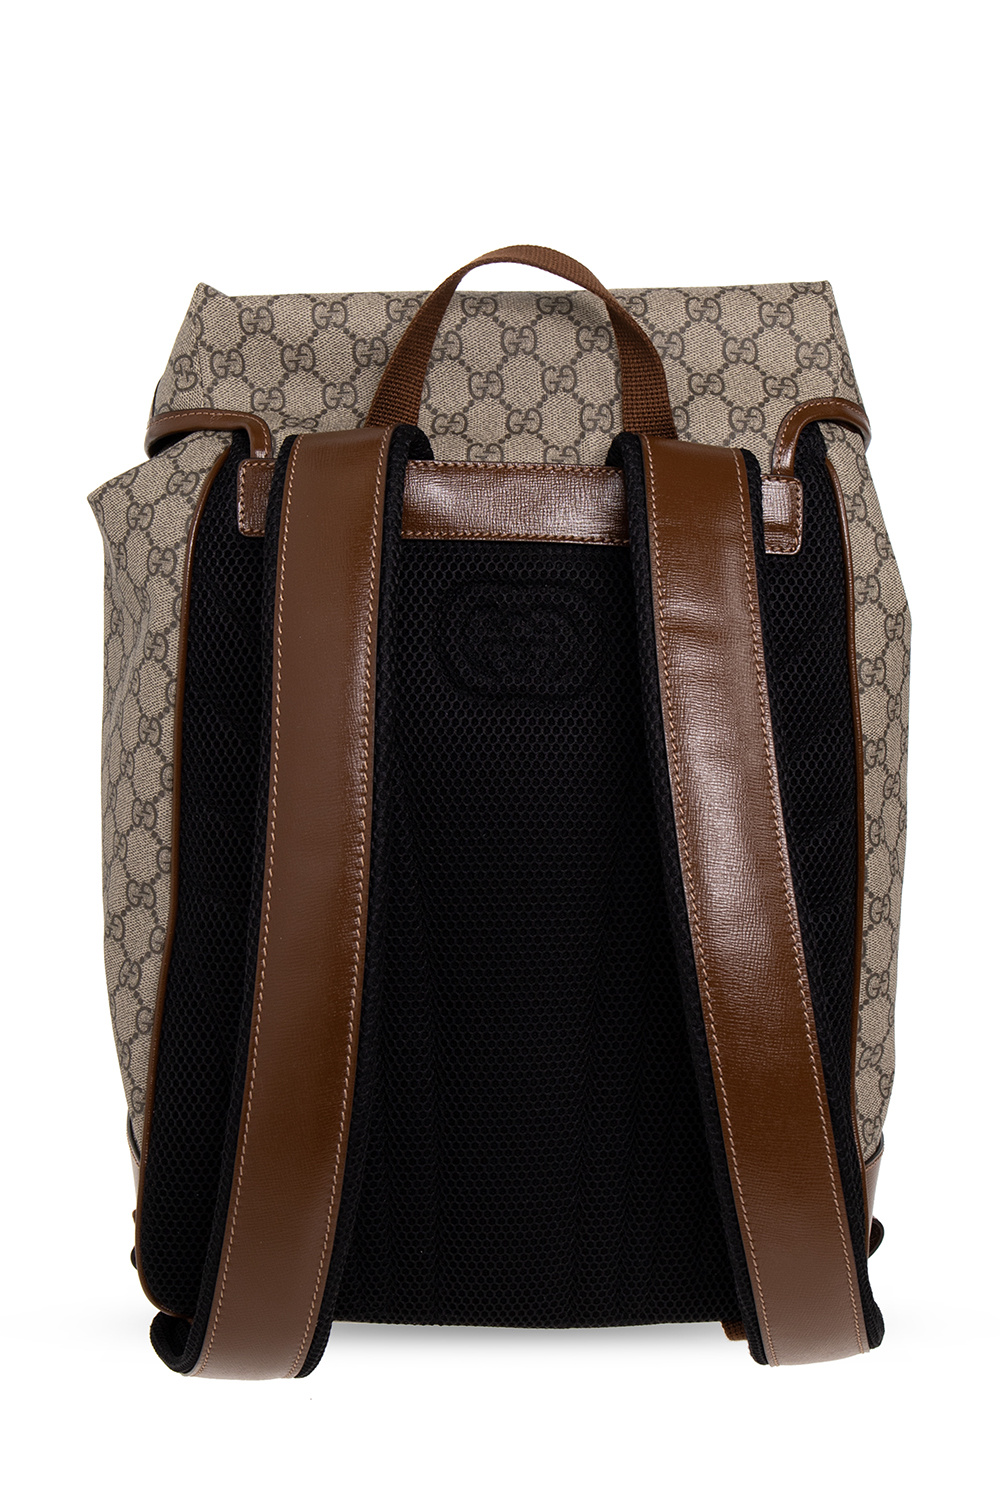 Gucci GG Canvas Travel Backpack (SHF-19306) – LuxeDH